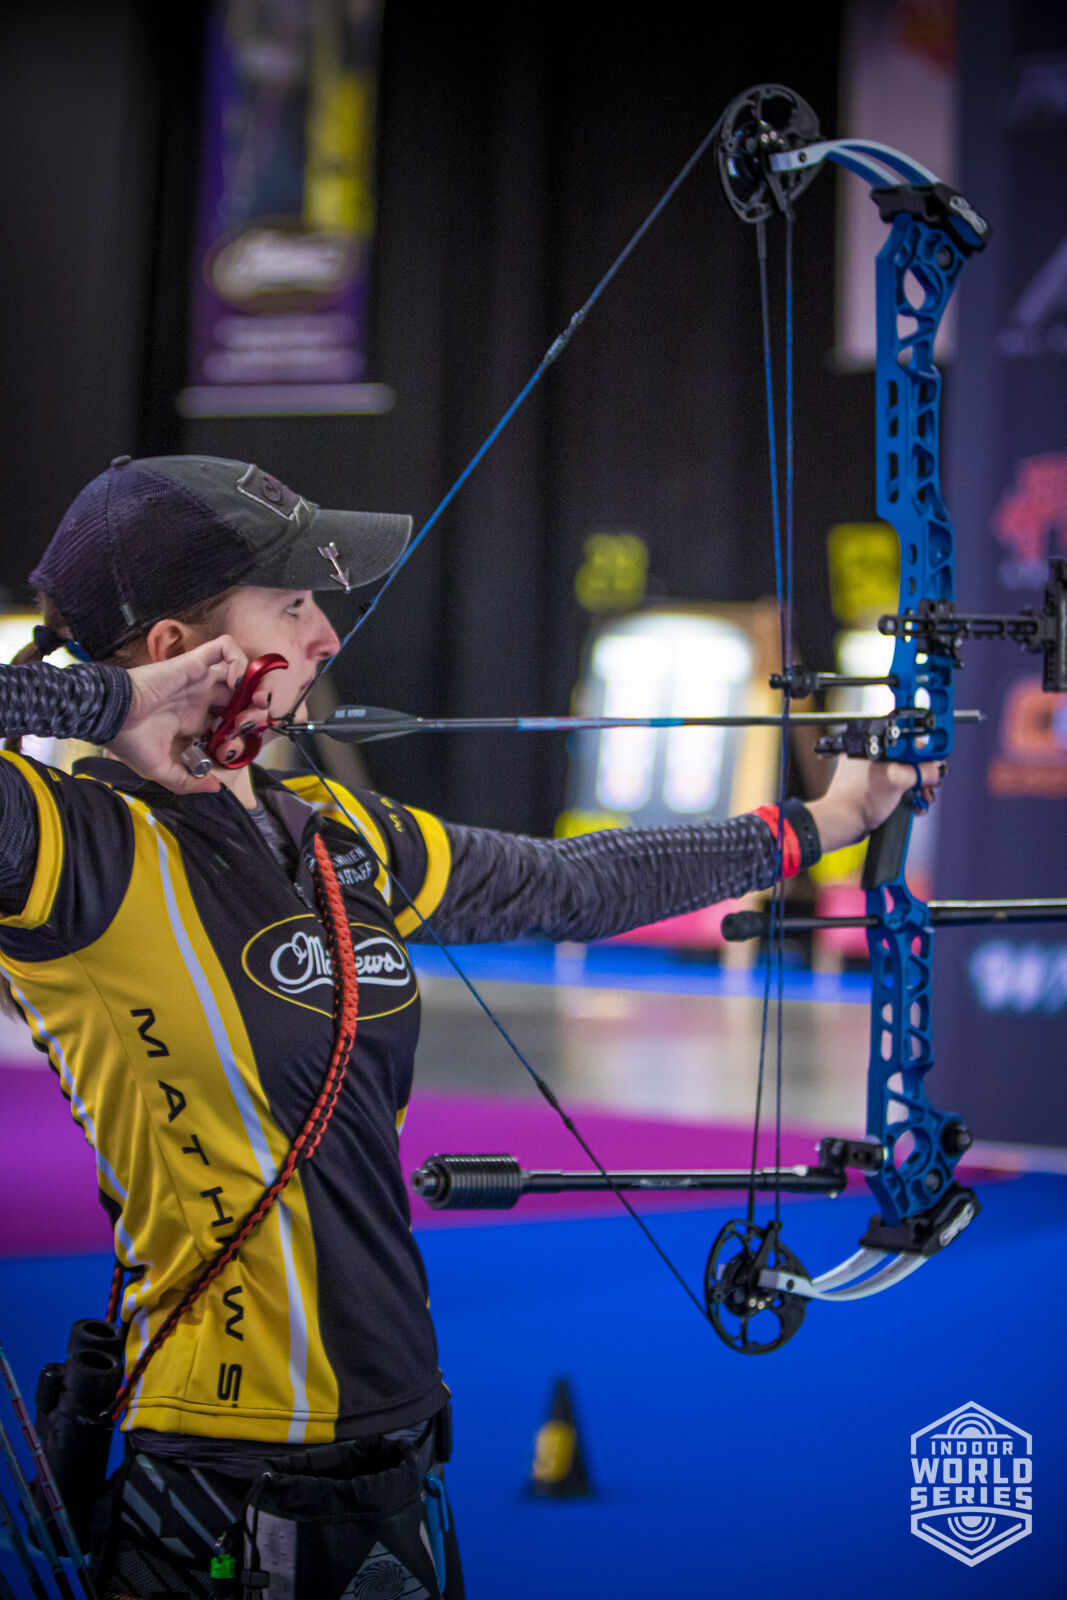 Tanja Jensen shoots during qualification at the Sud de France – Nimes Archery Tournament in 2021.